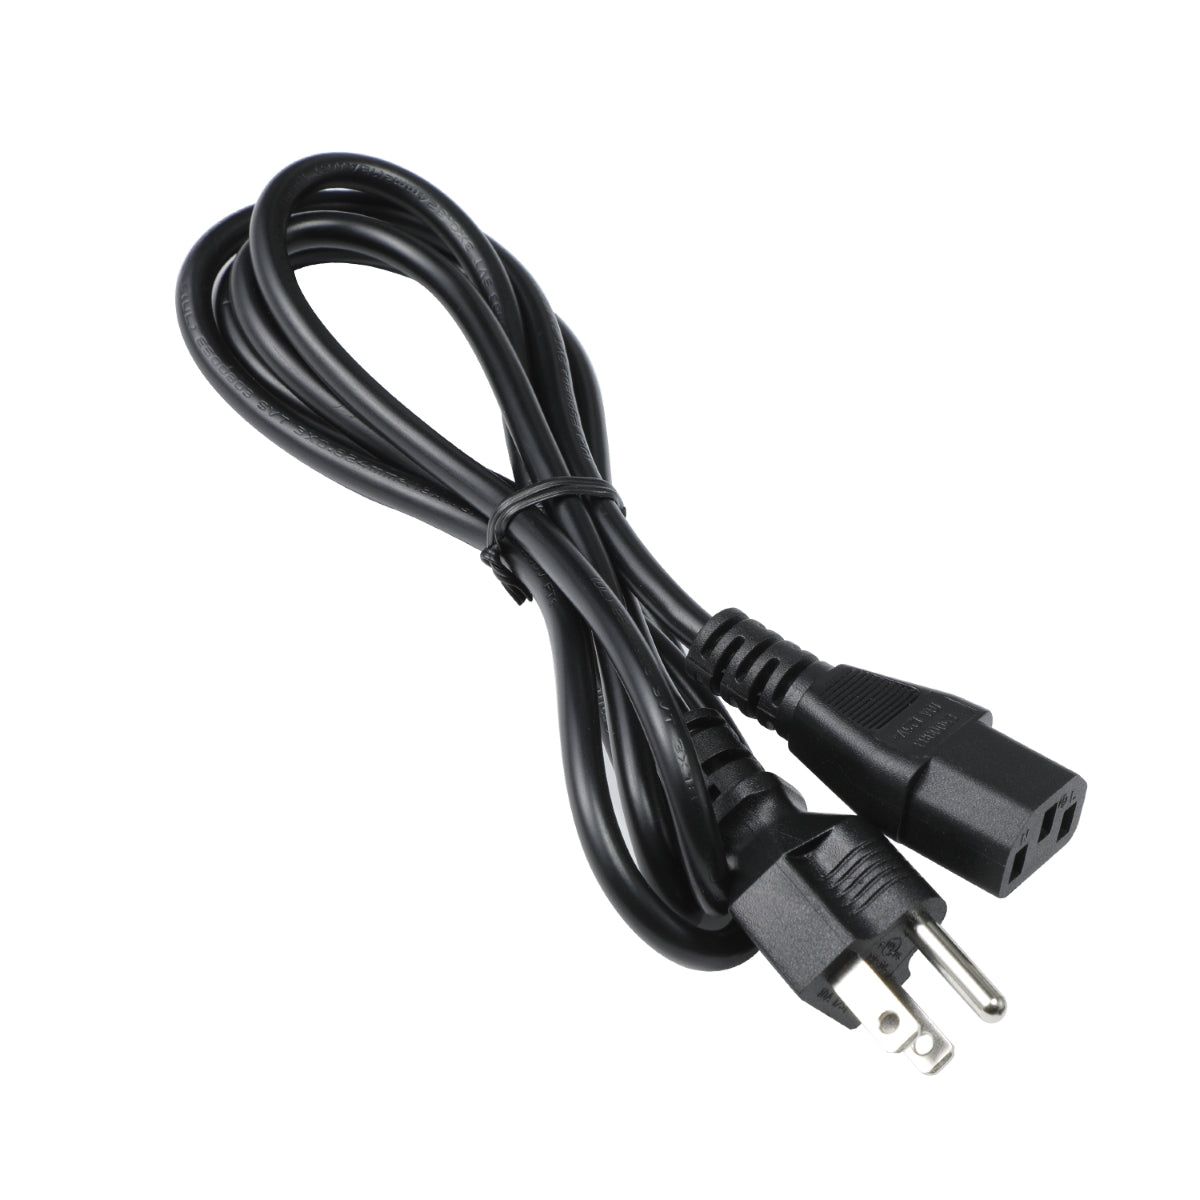 Power Cord for ASUS VS228H-P Monitor.